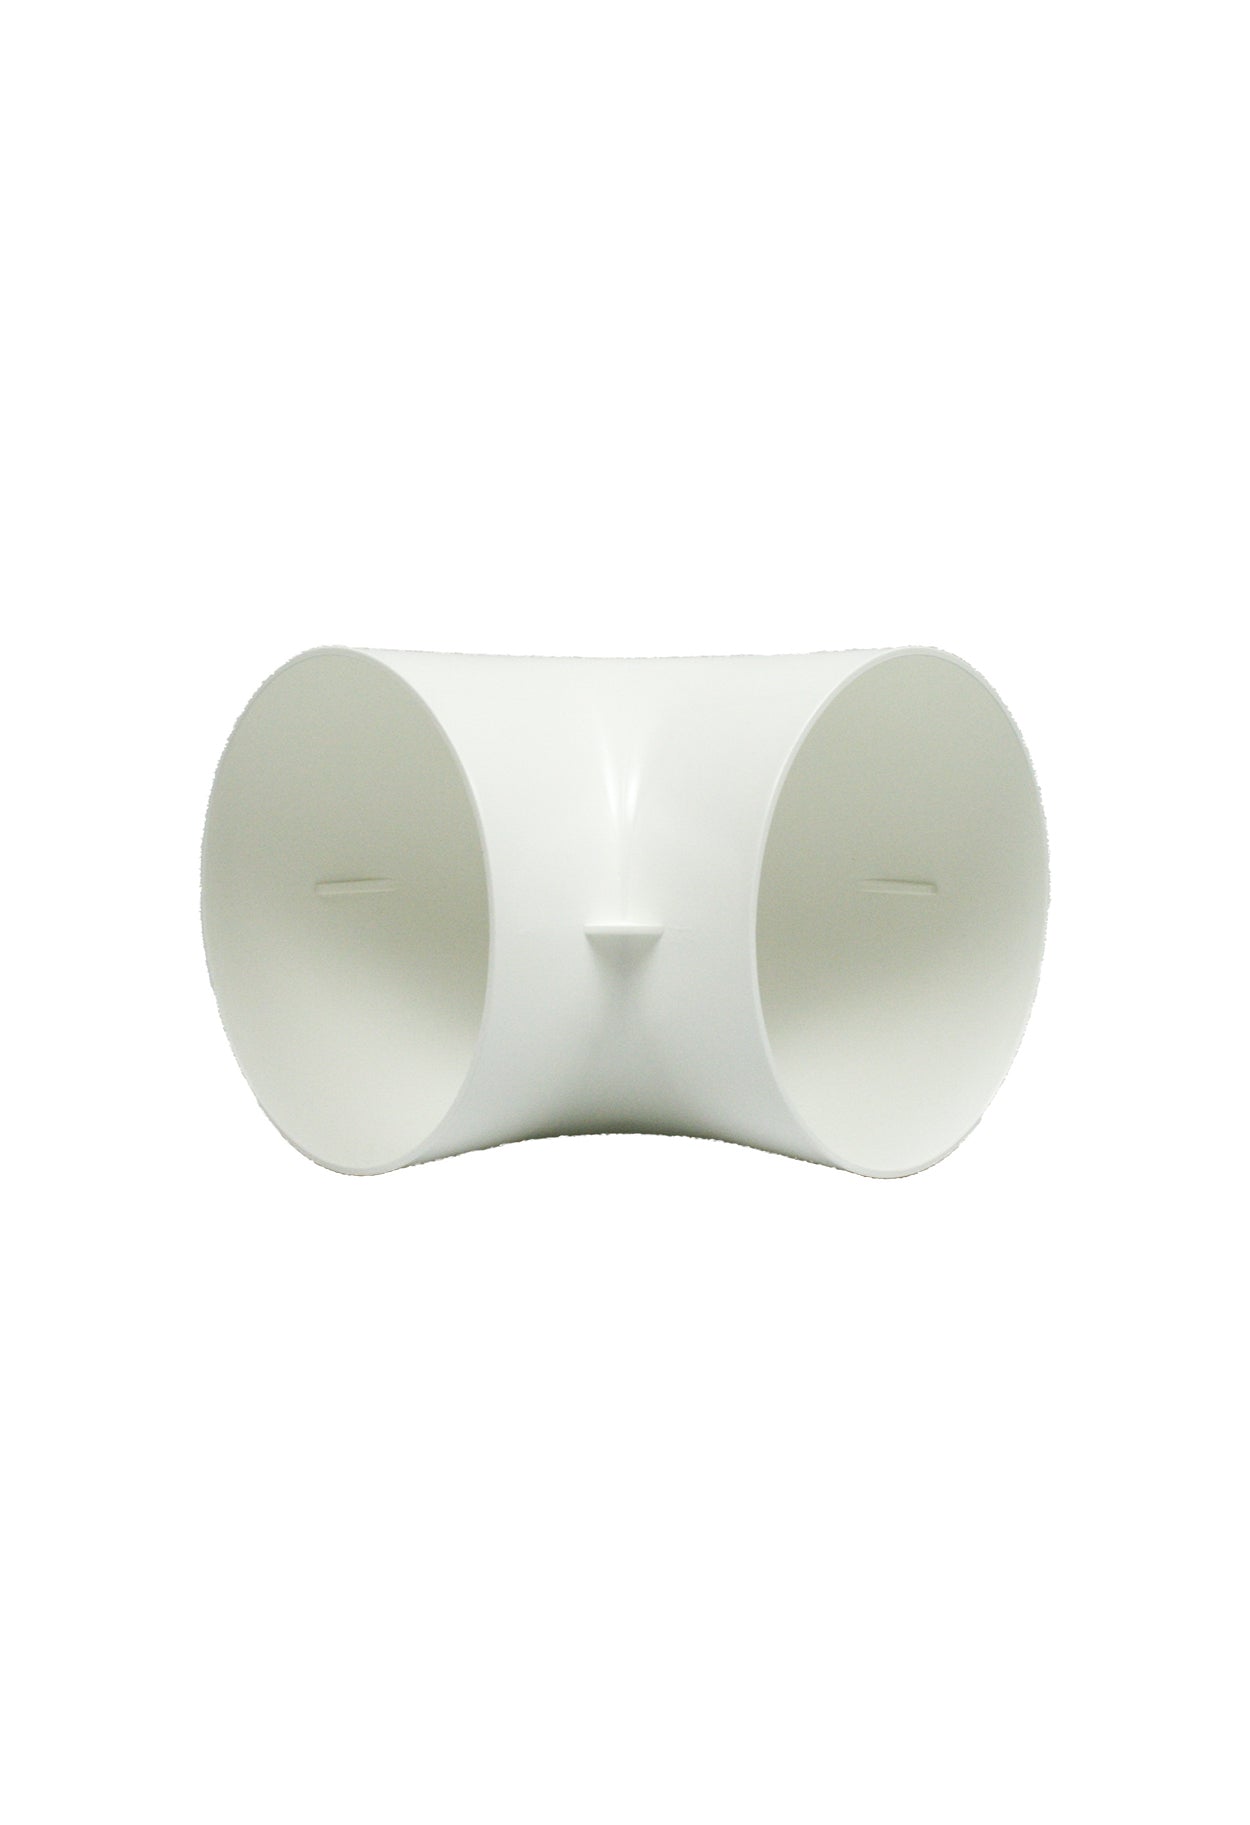 90° connector pipe for 3 inch ventilation pipe